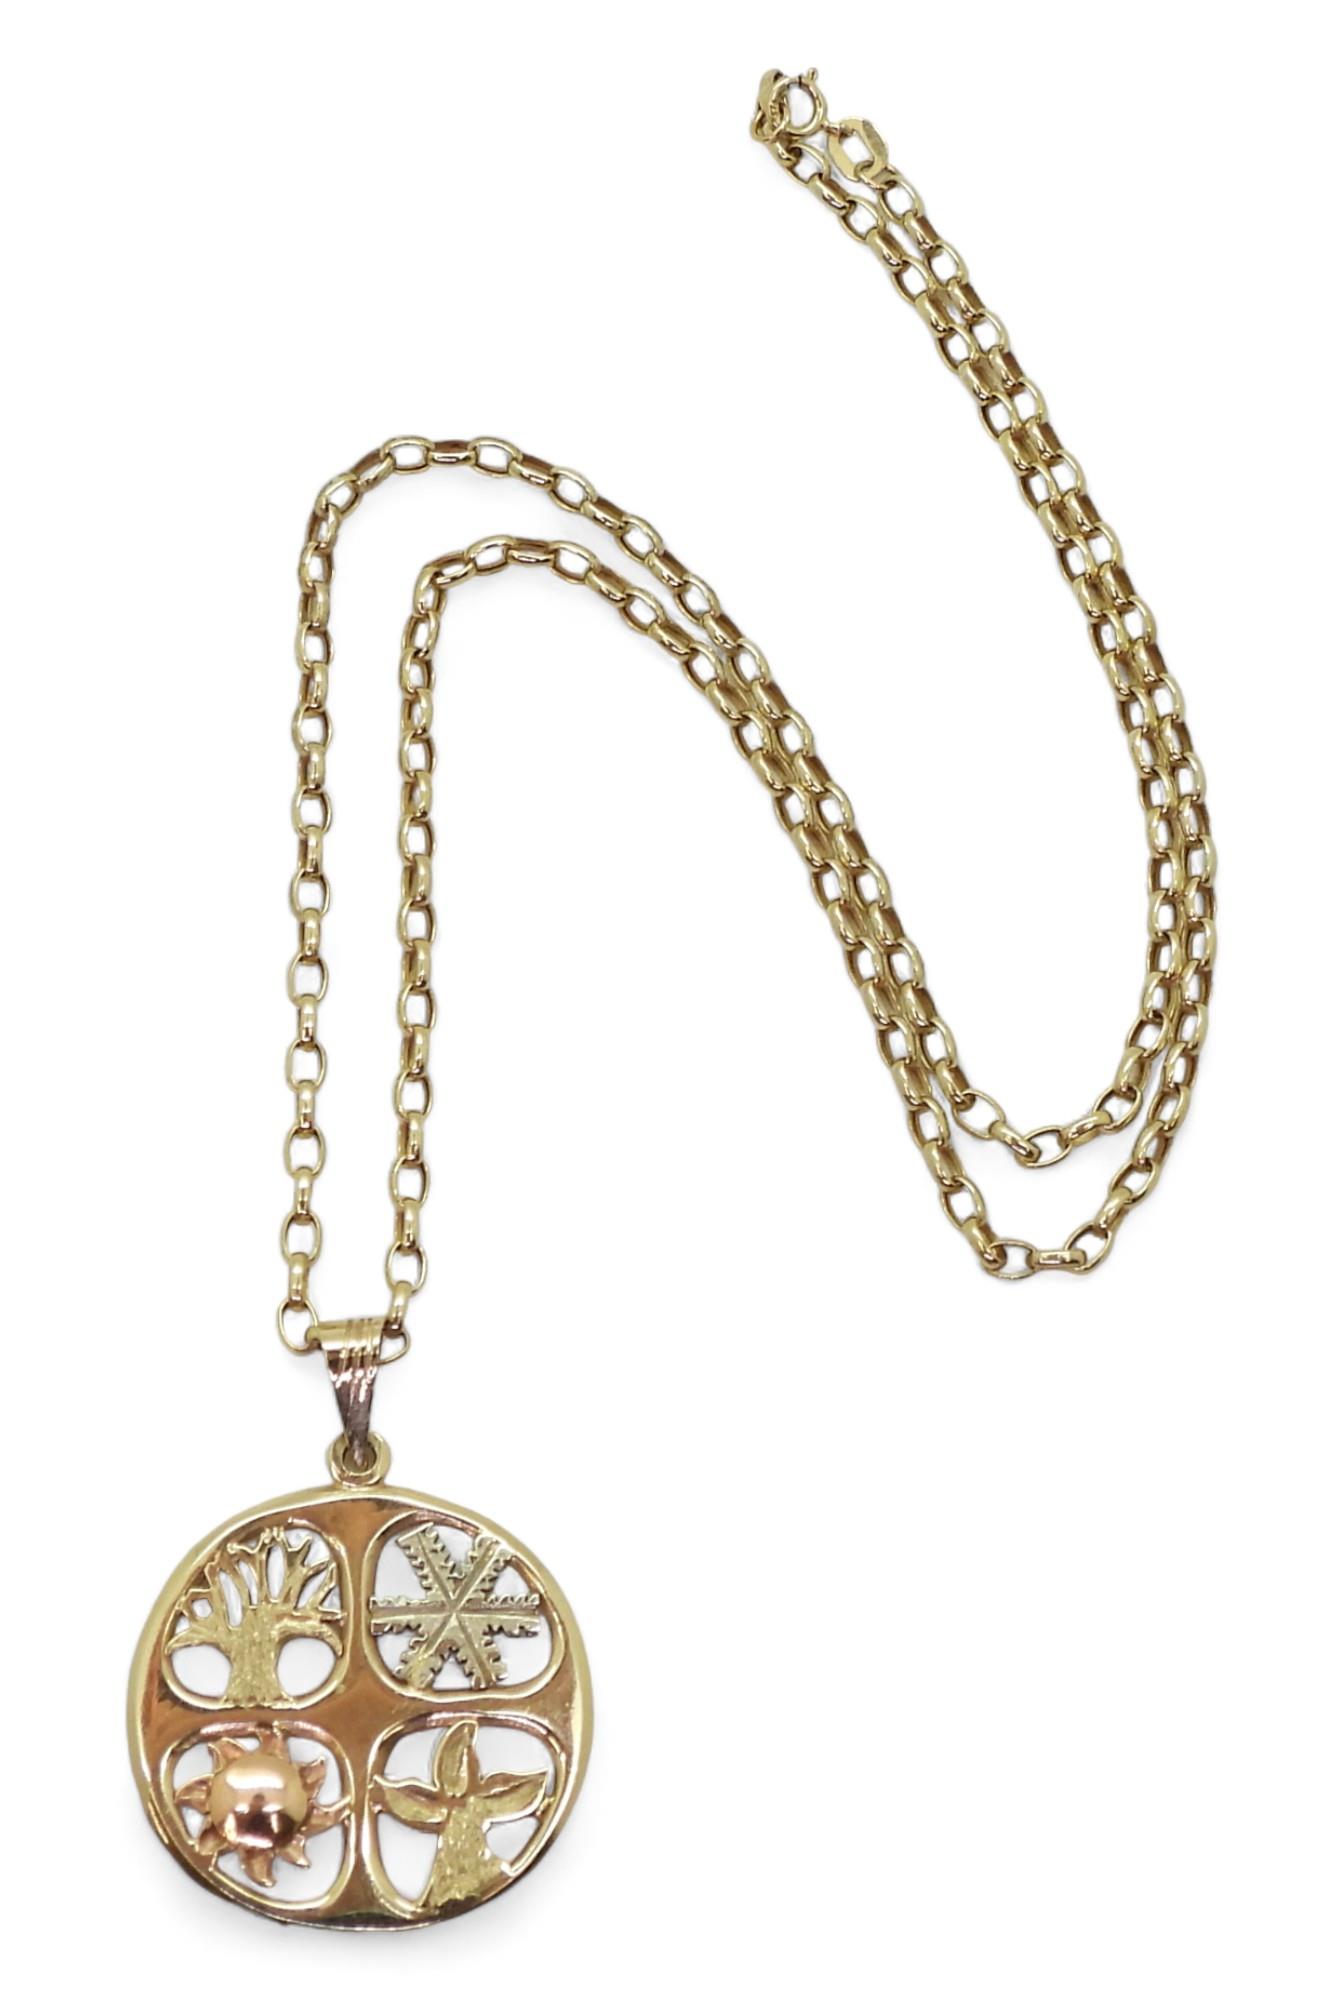 A 14k three colour gold Four Seasons pendant weight 4.7gms, together with a 9ct gold 45cm belcher